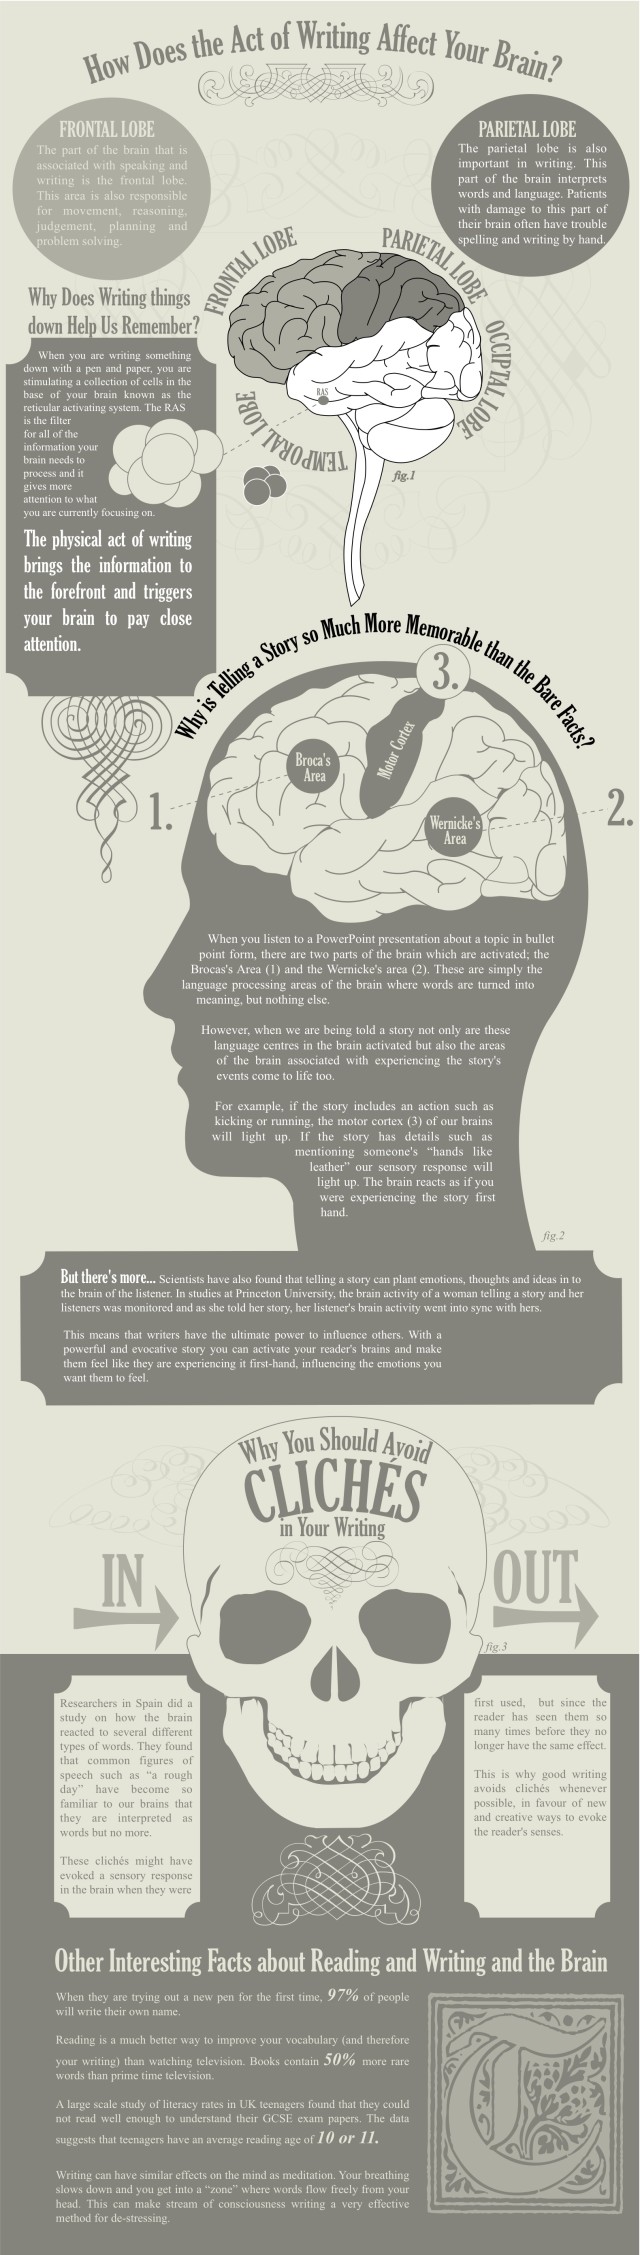 amazing-facts-about-writing-and-the-brain-640x2255